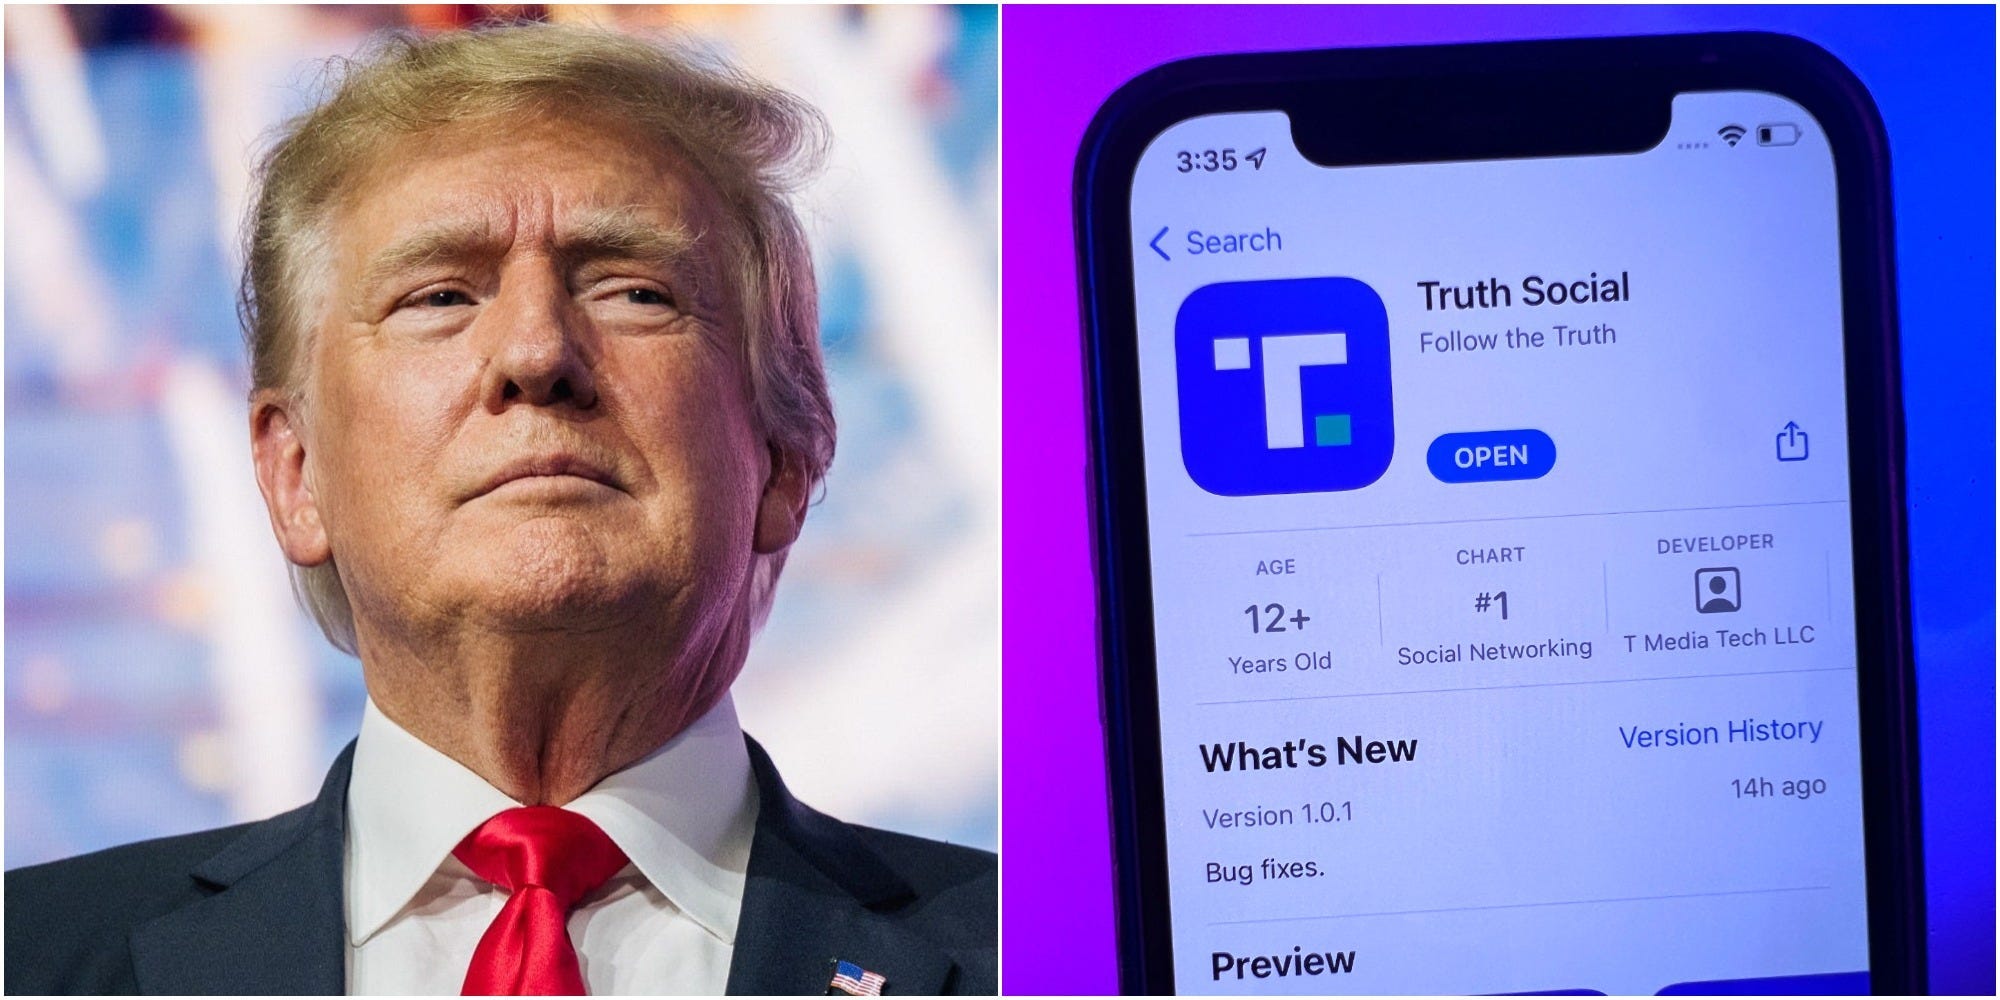 microsoft, here's how users on truth social are feeling about trump media's steep stock decline